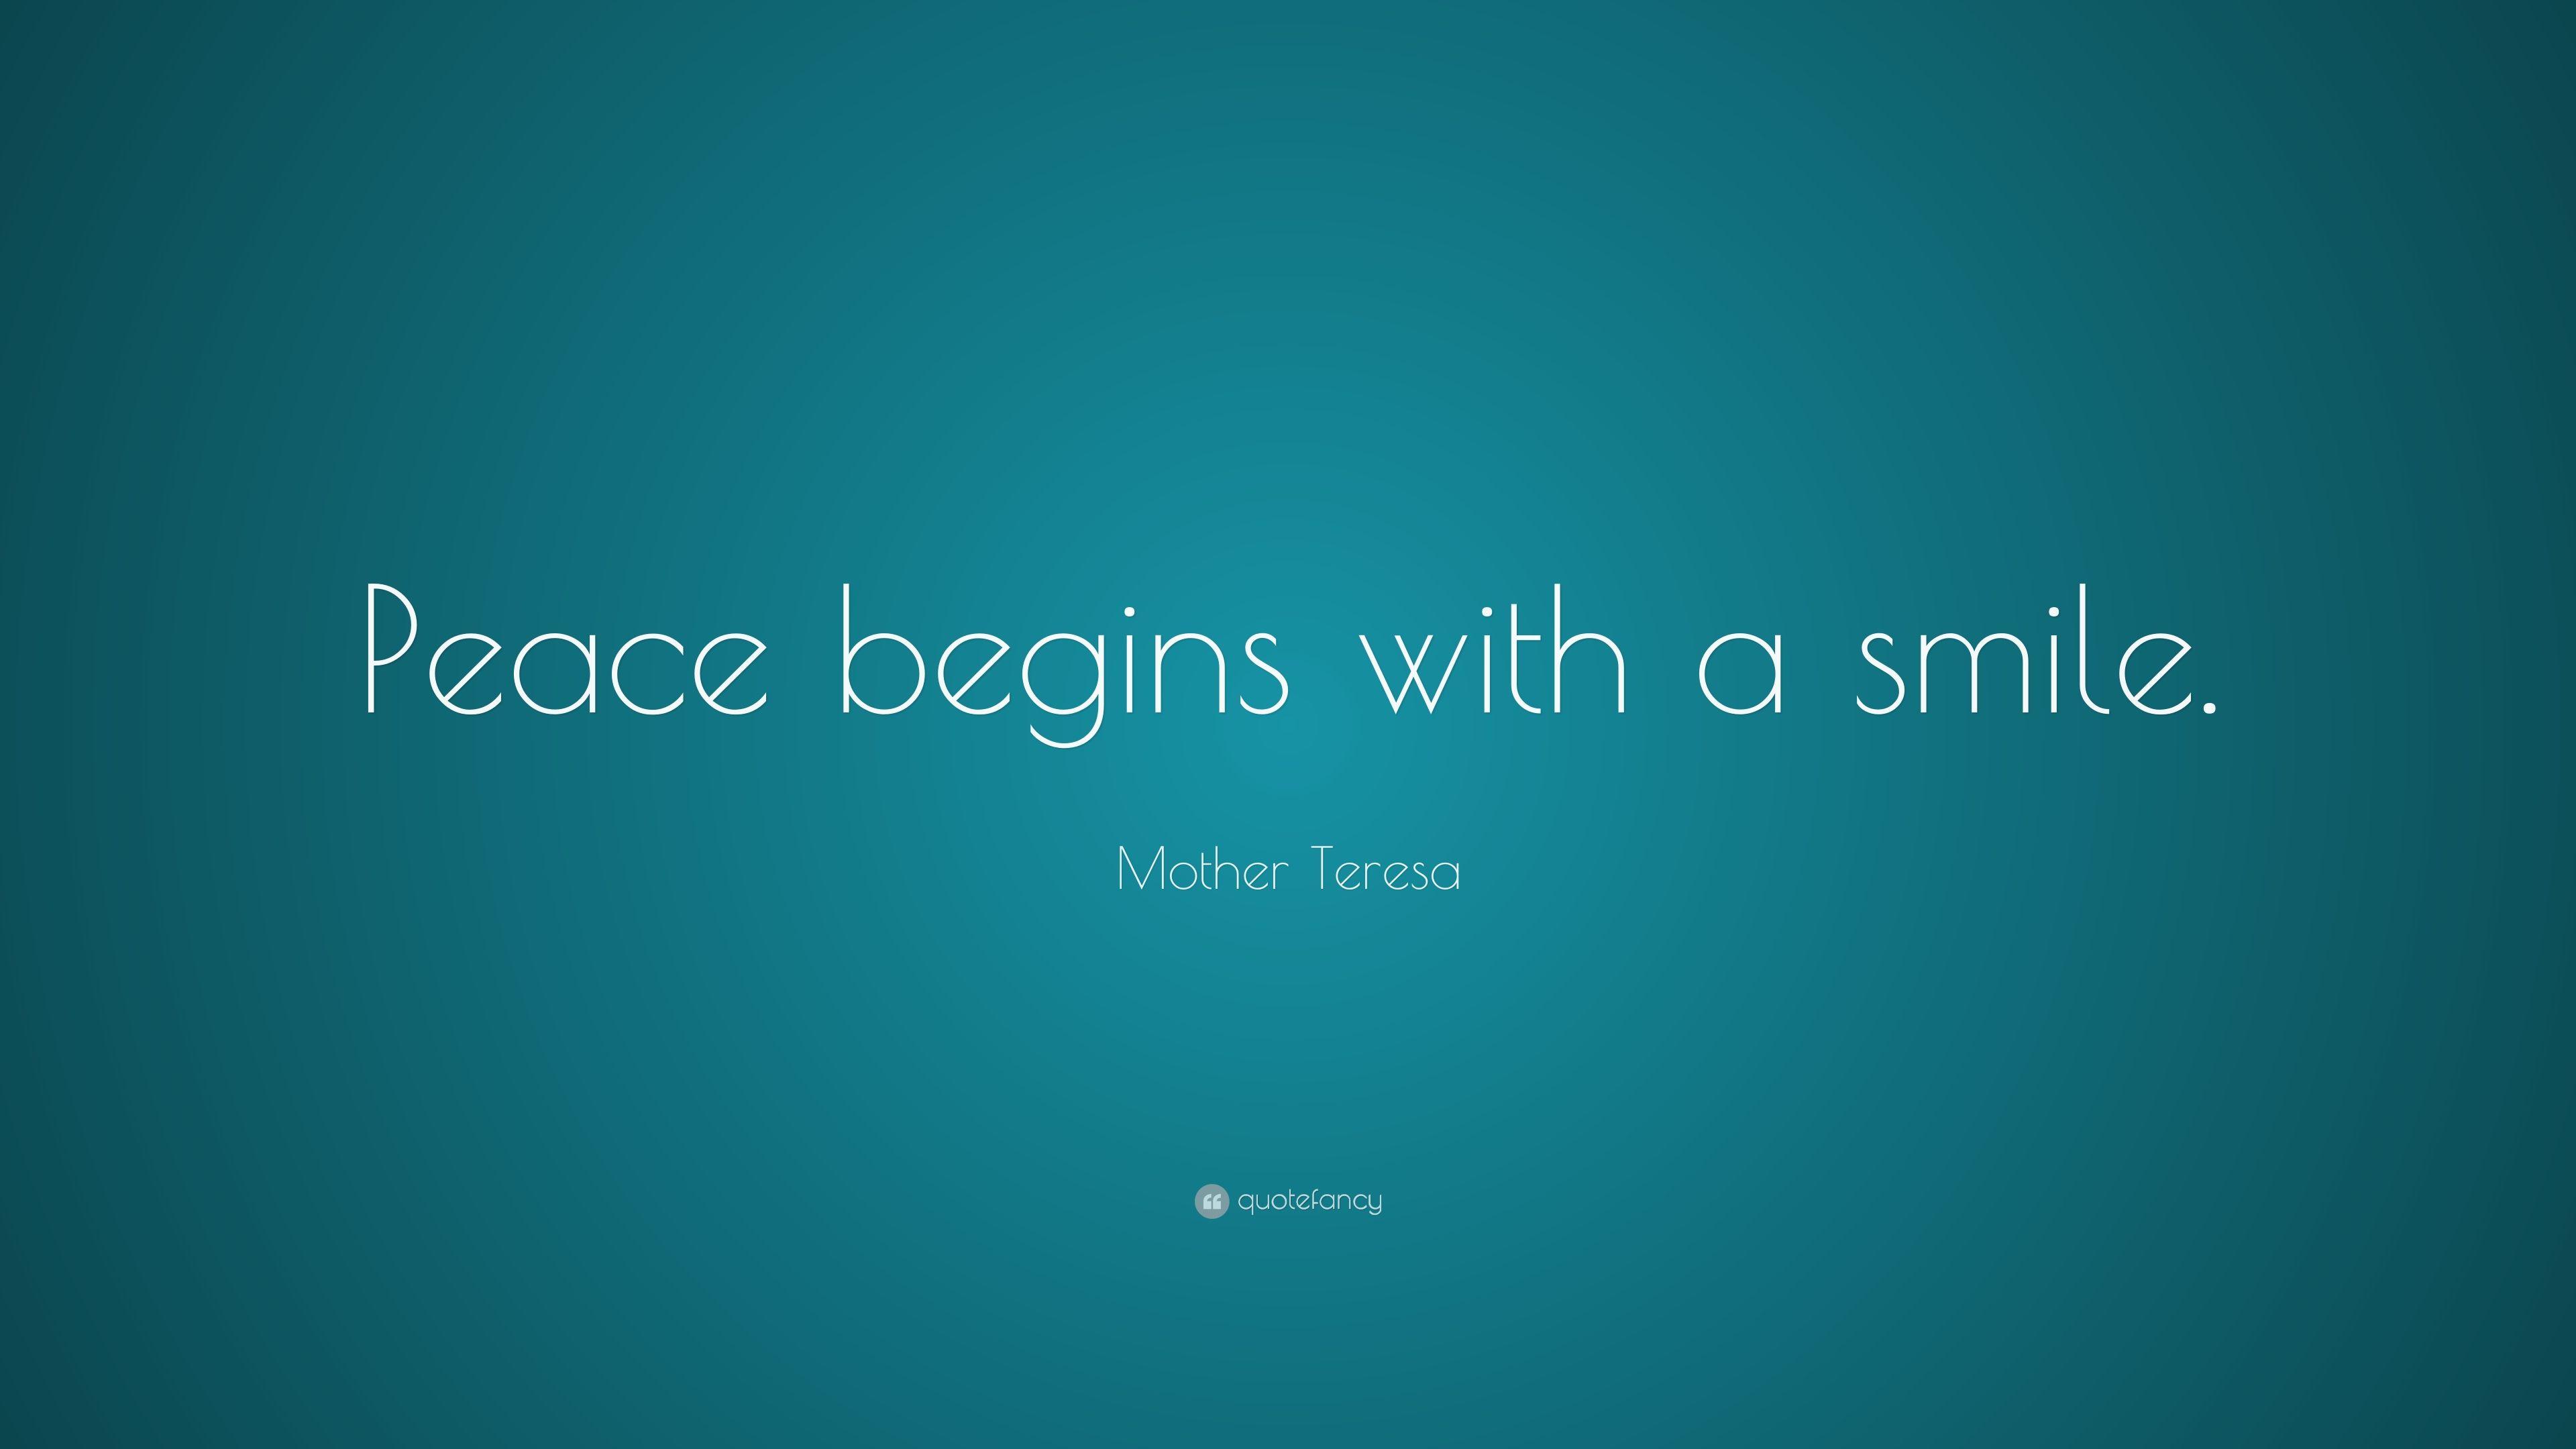 Mother Teresa Quote: “Peace begins with a smile.” 25 wallpaper